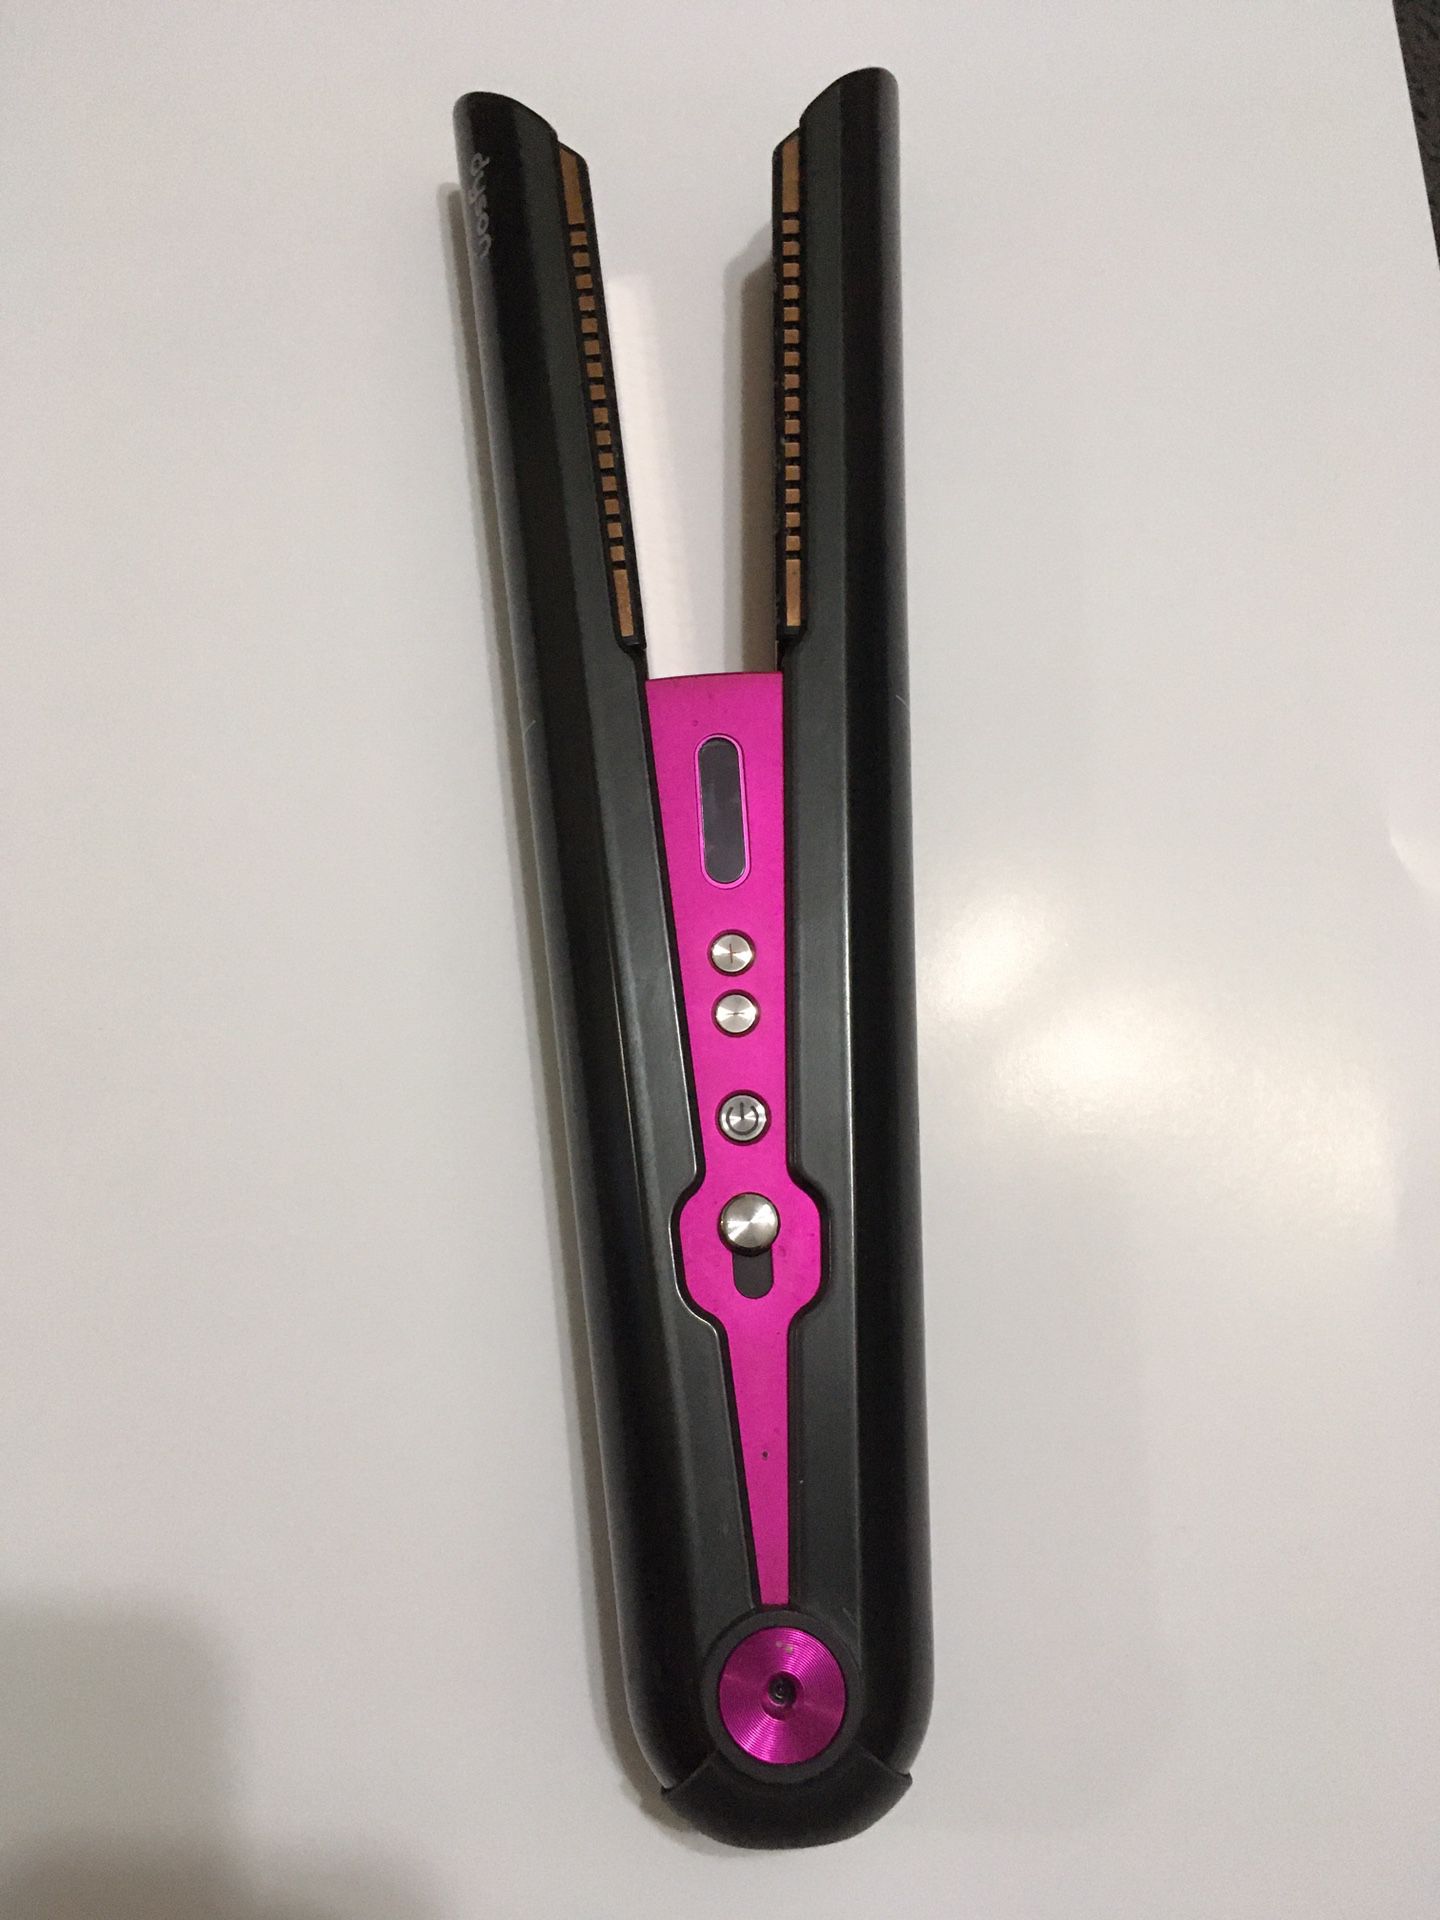 Dyson Corrale Hair Straightener - HS03 Fuschia/Black   It blinks white light when power button is pressed and nothing happens after that . Does not tu